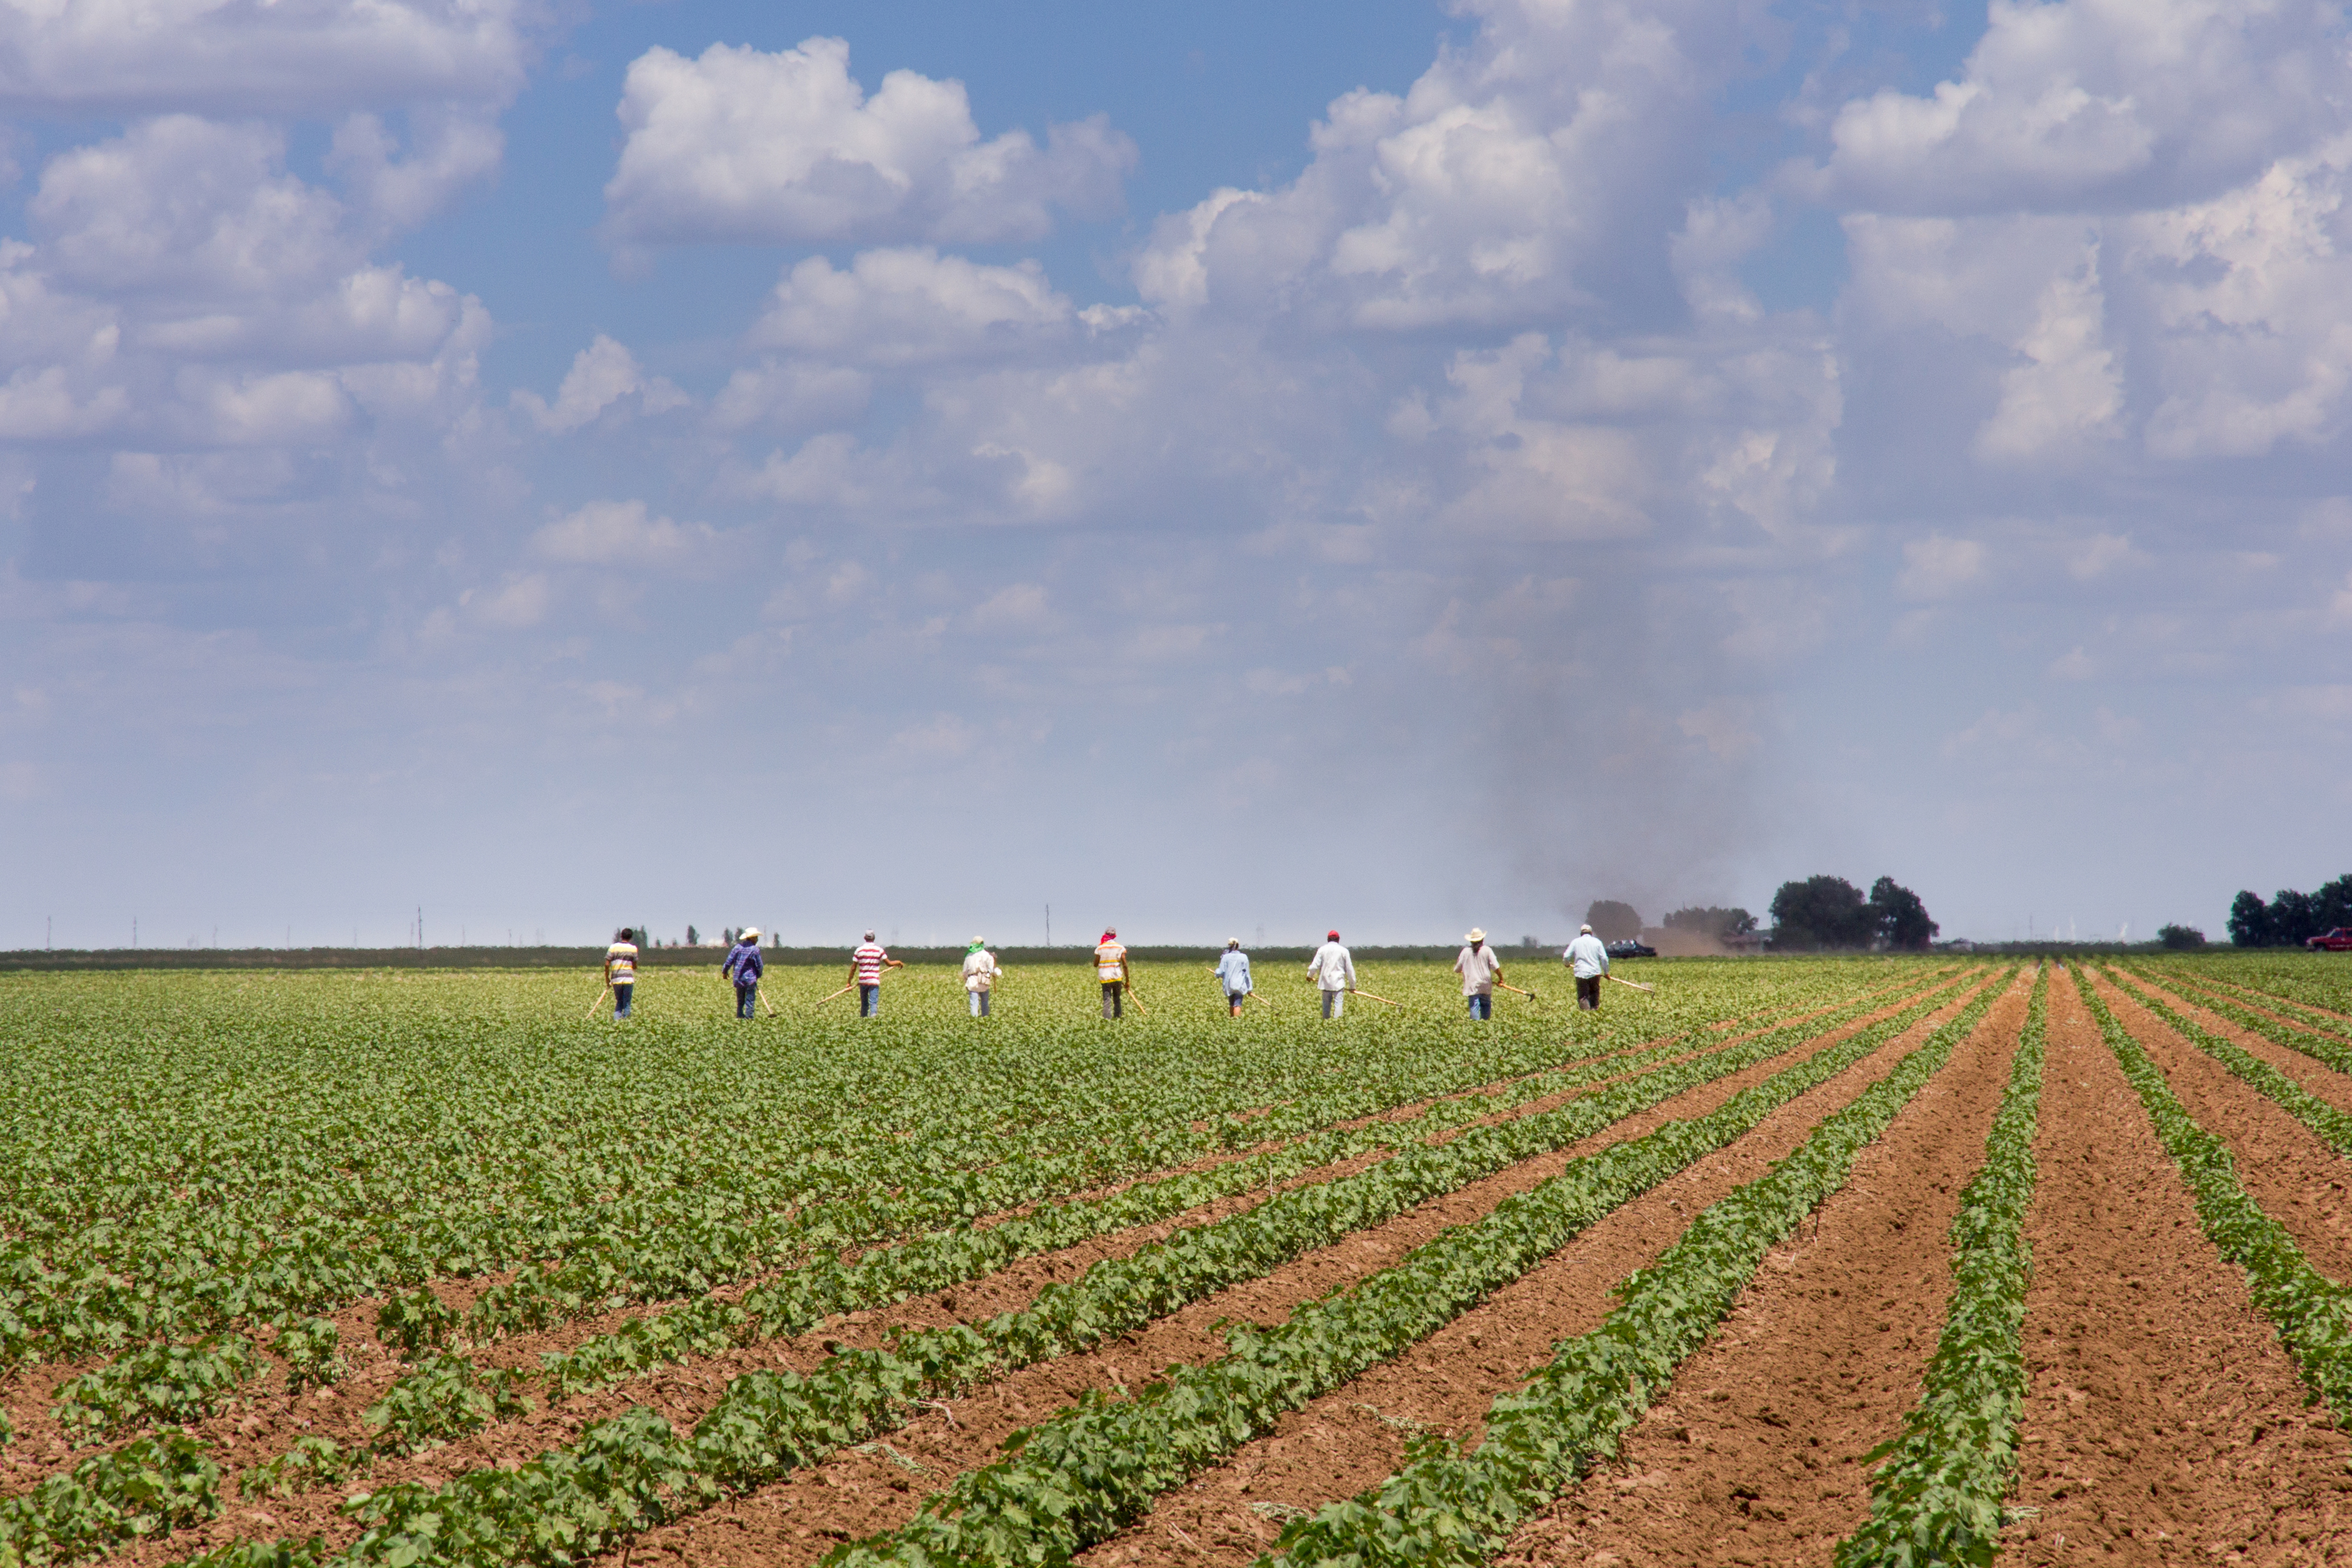 Farm workers walk in a line down rows of crops